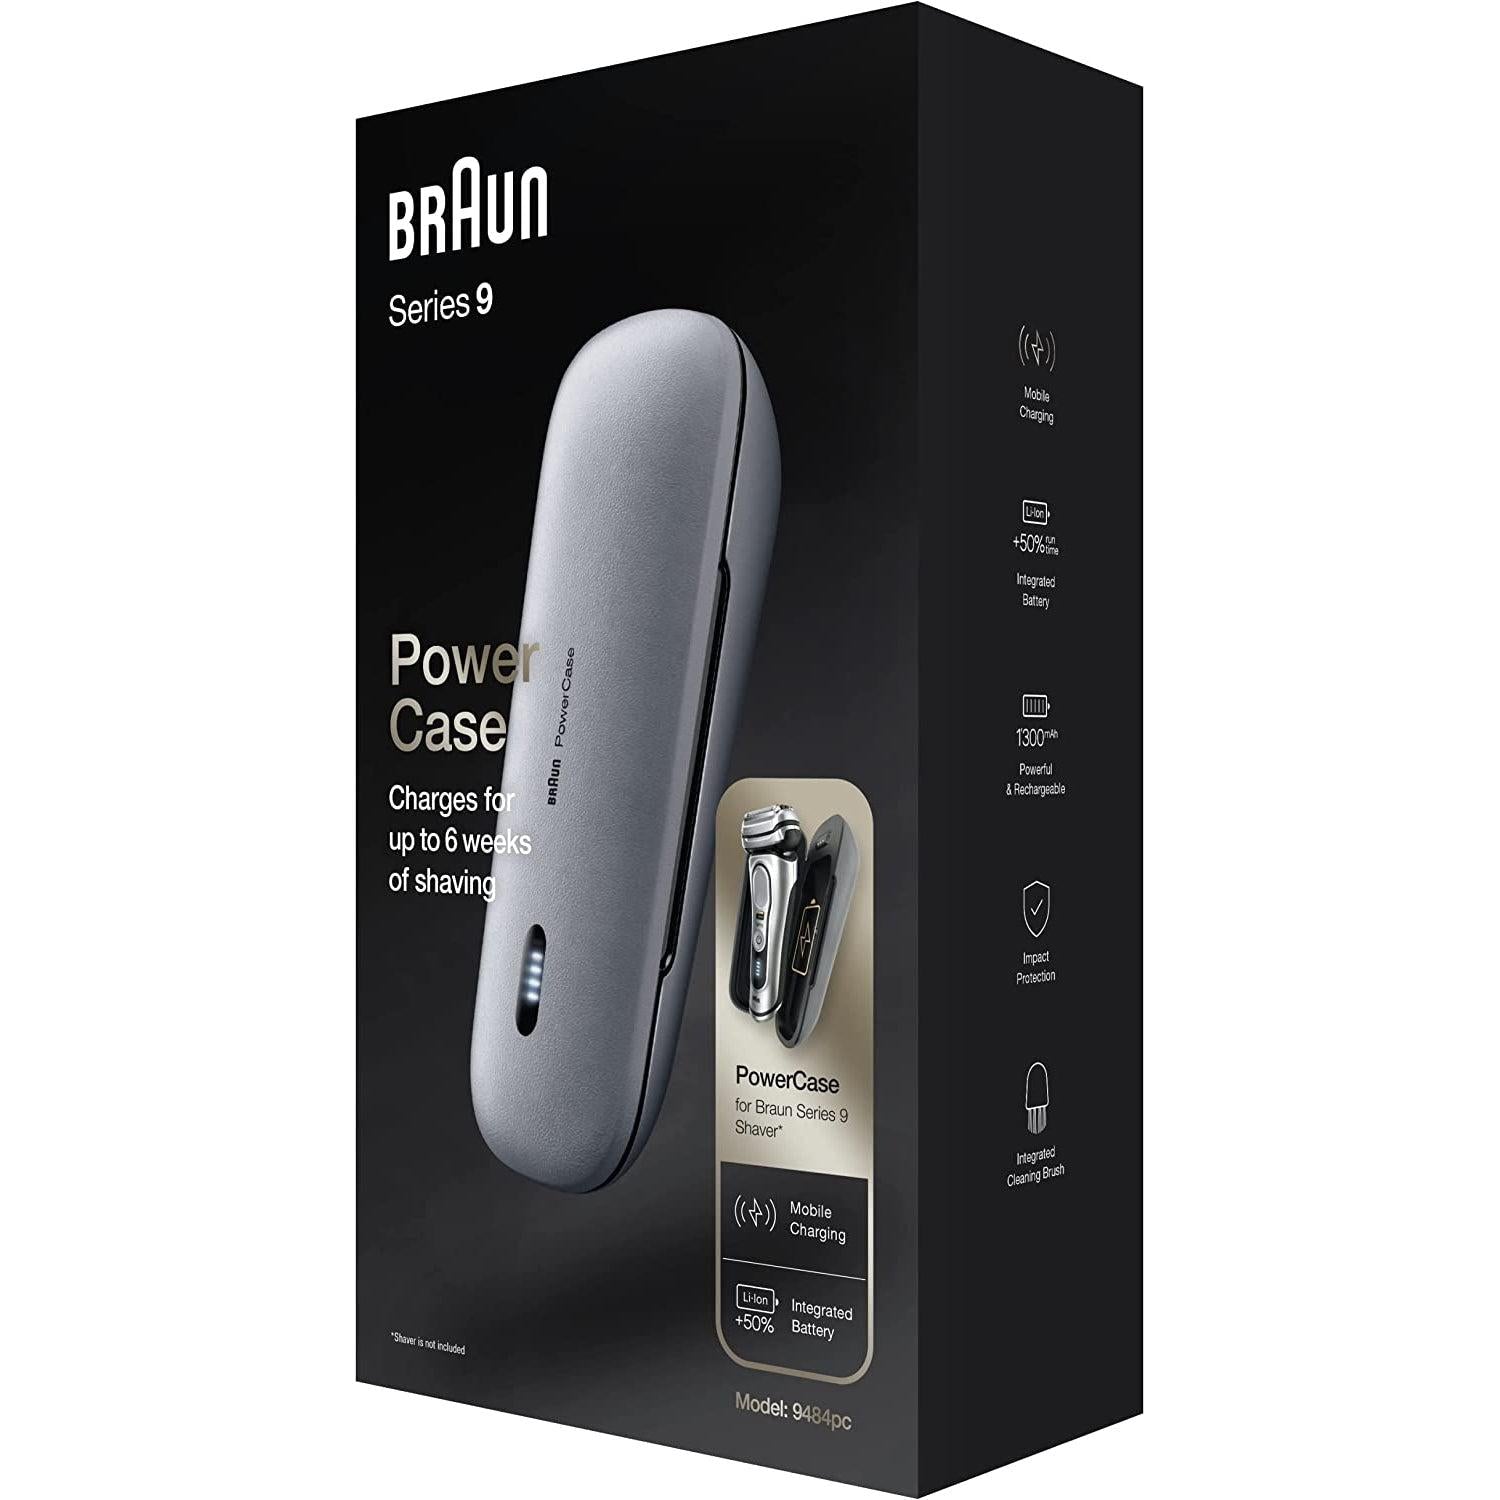 Braun PowerCase, Electric Shaver Charging Case, Compatible with Braun Series 9 & 8 Shavers,6 Weeks of Shaving - Healthxpress.ie